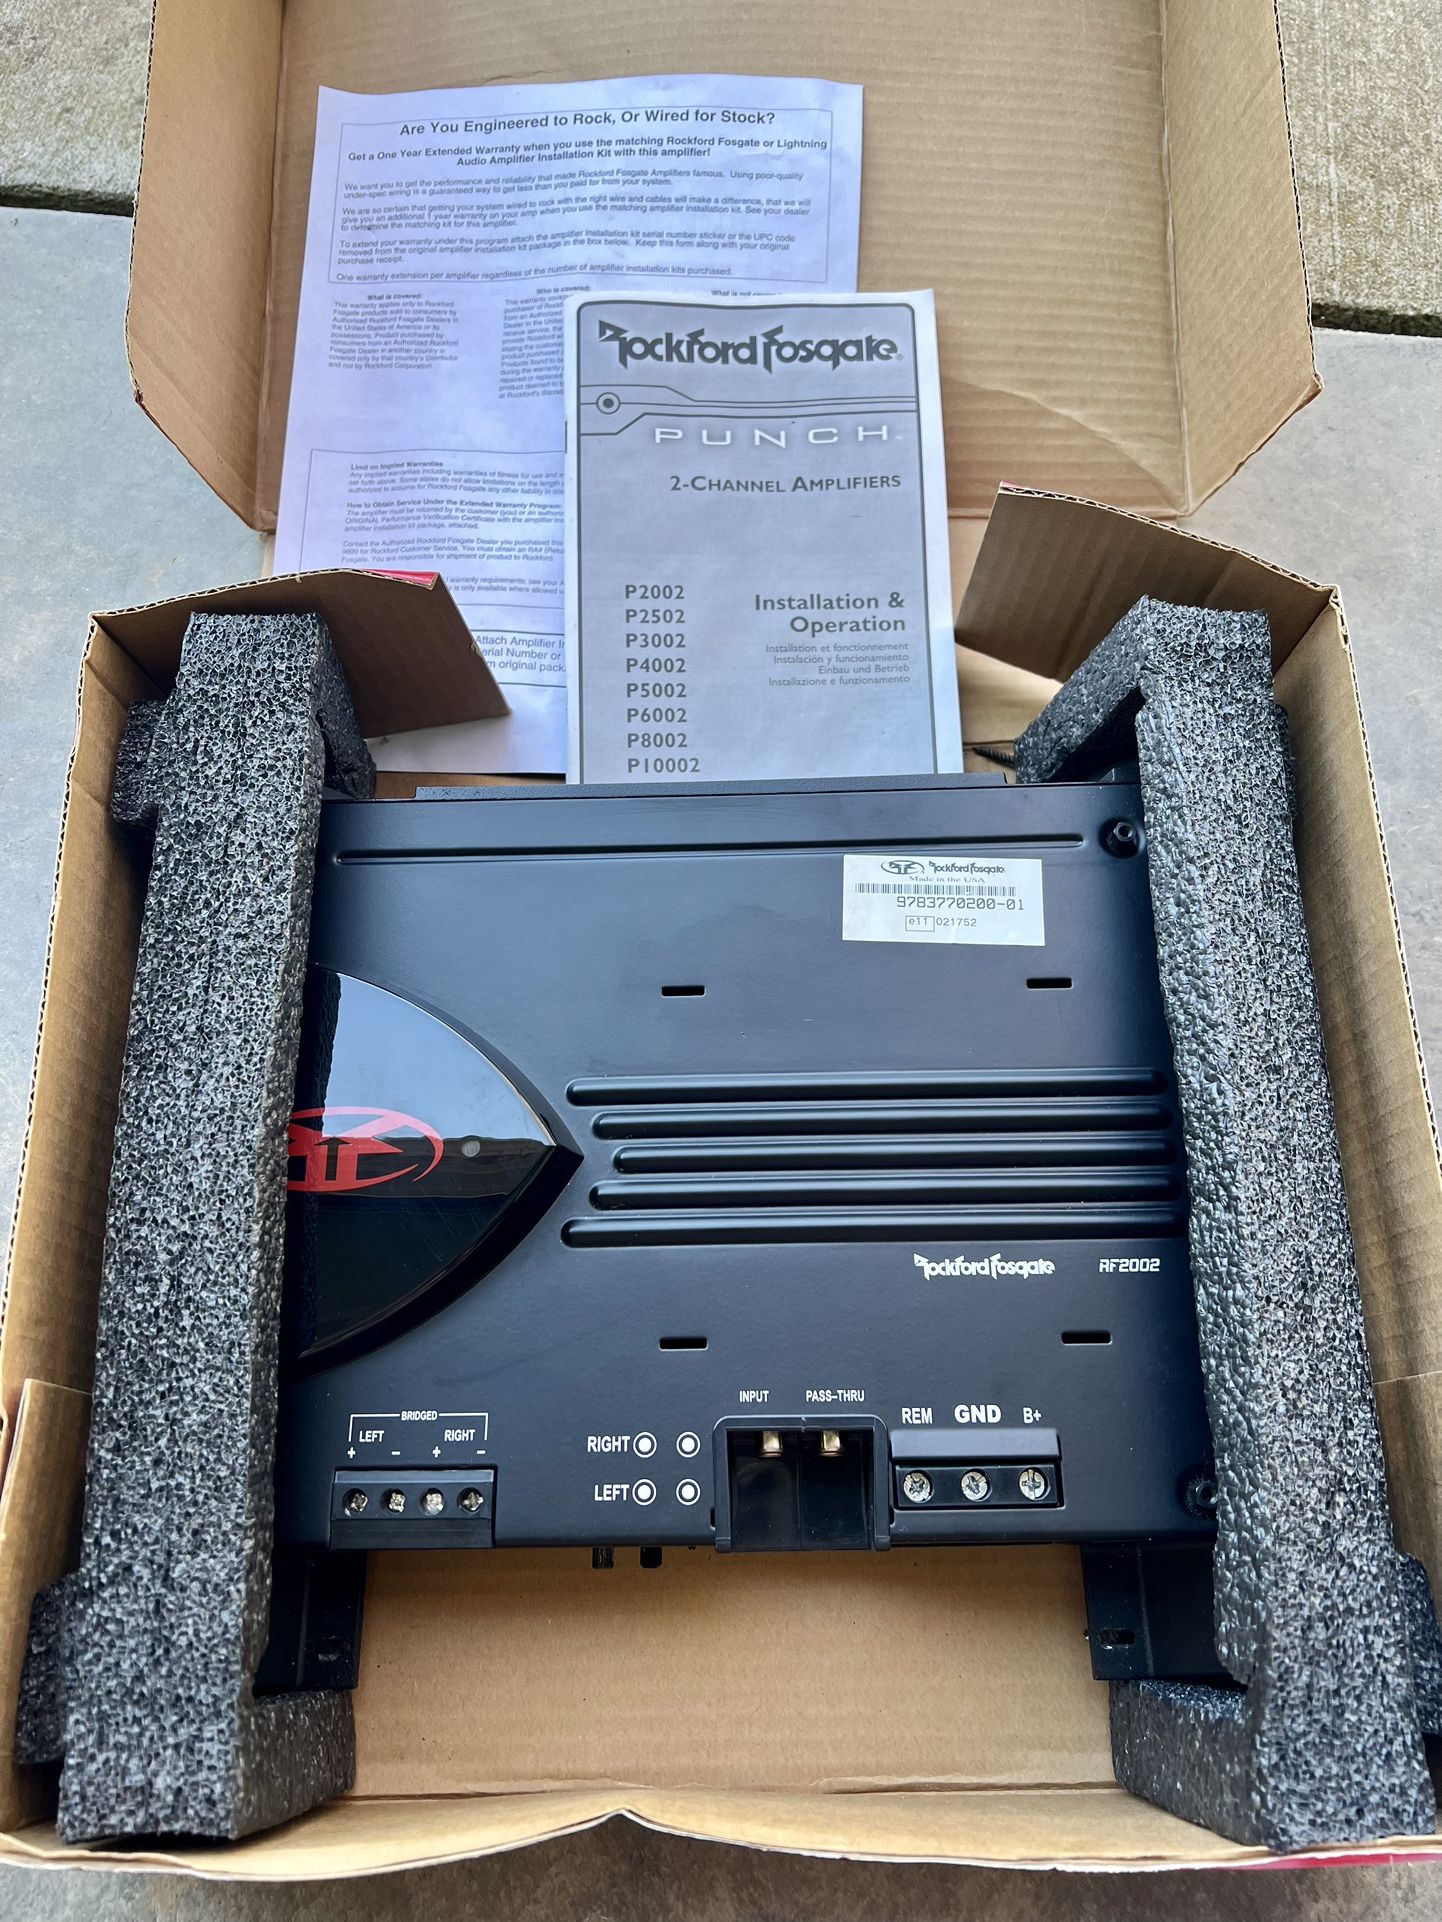 Never Used And Still In Box! ROCKFORD FOSGATE  PUNCH Amplifier Model # P2002